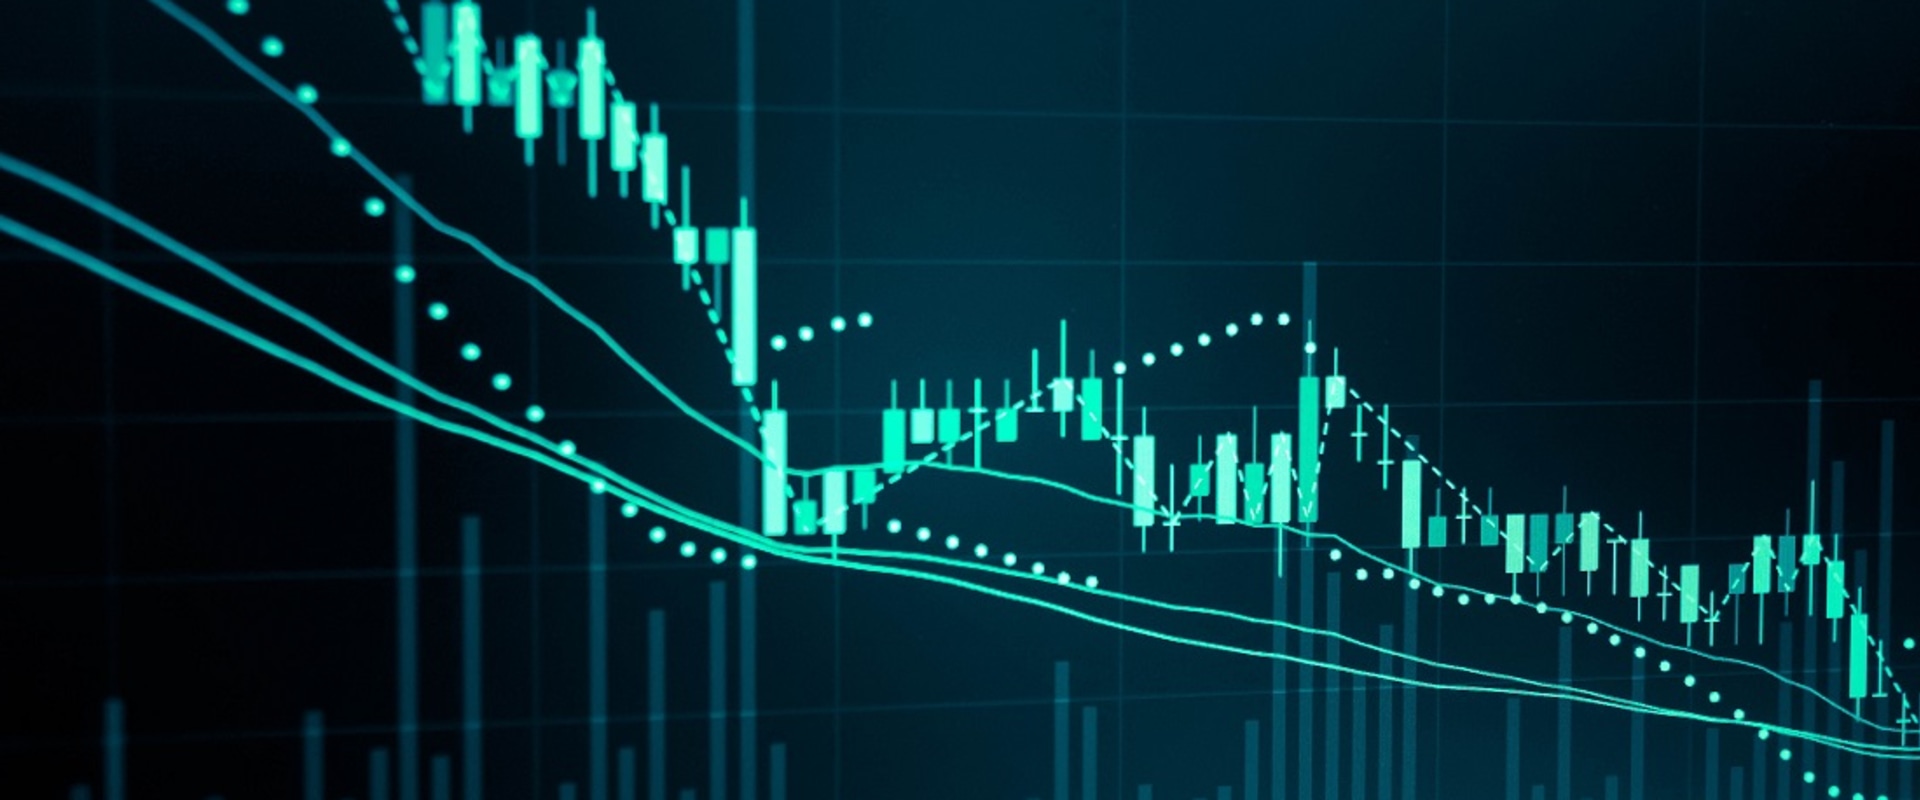 3 Ways to Spot Cryptocurrency Arbitrage Opportunities